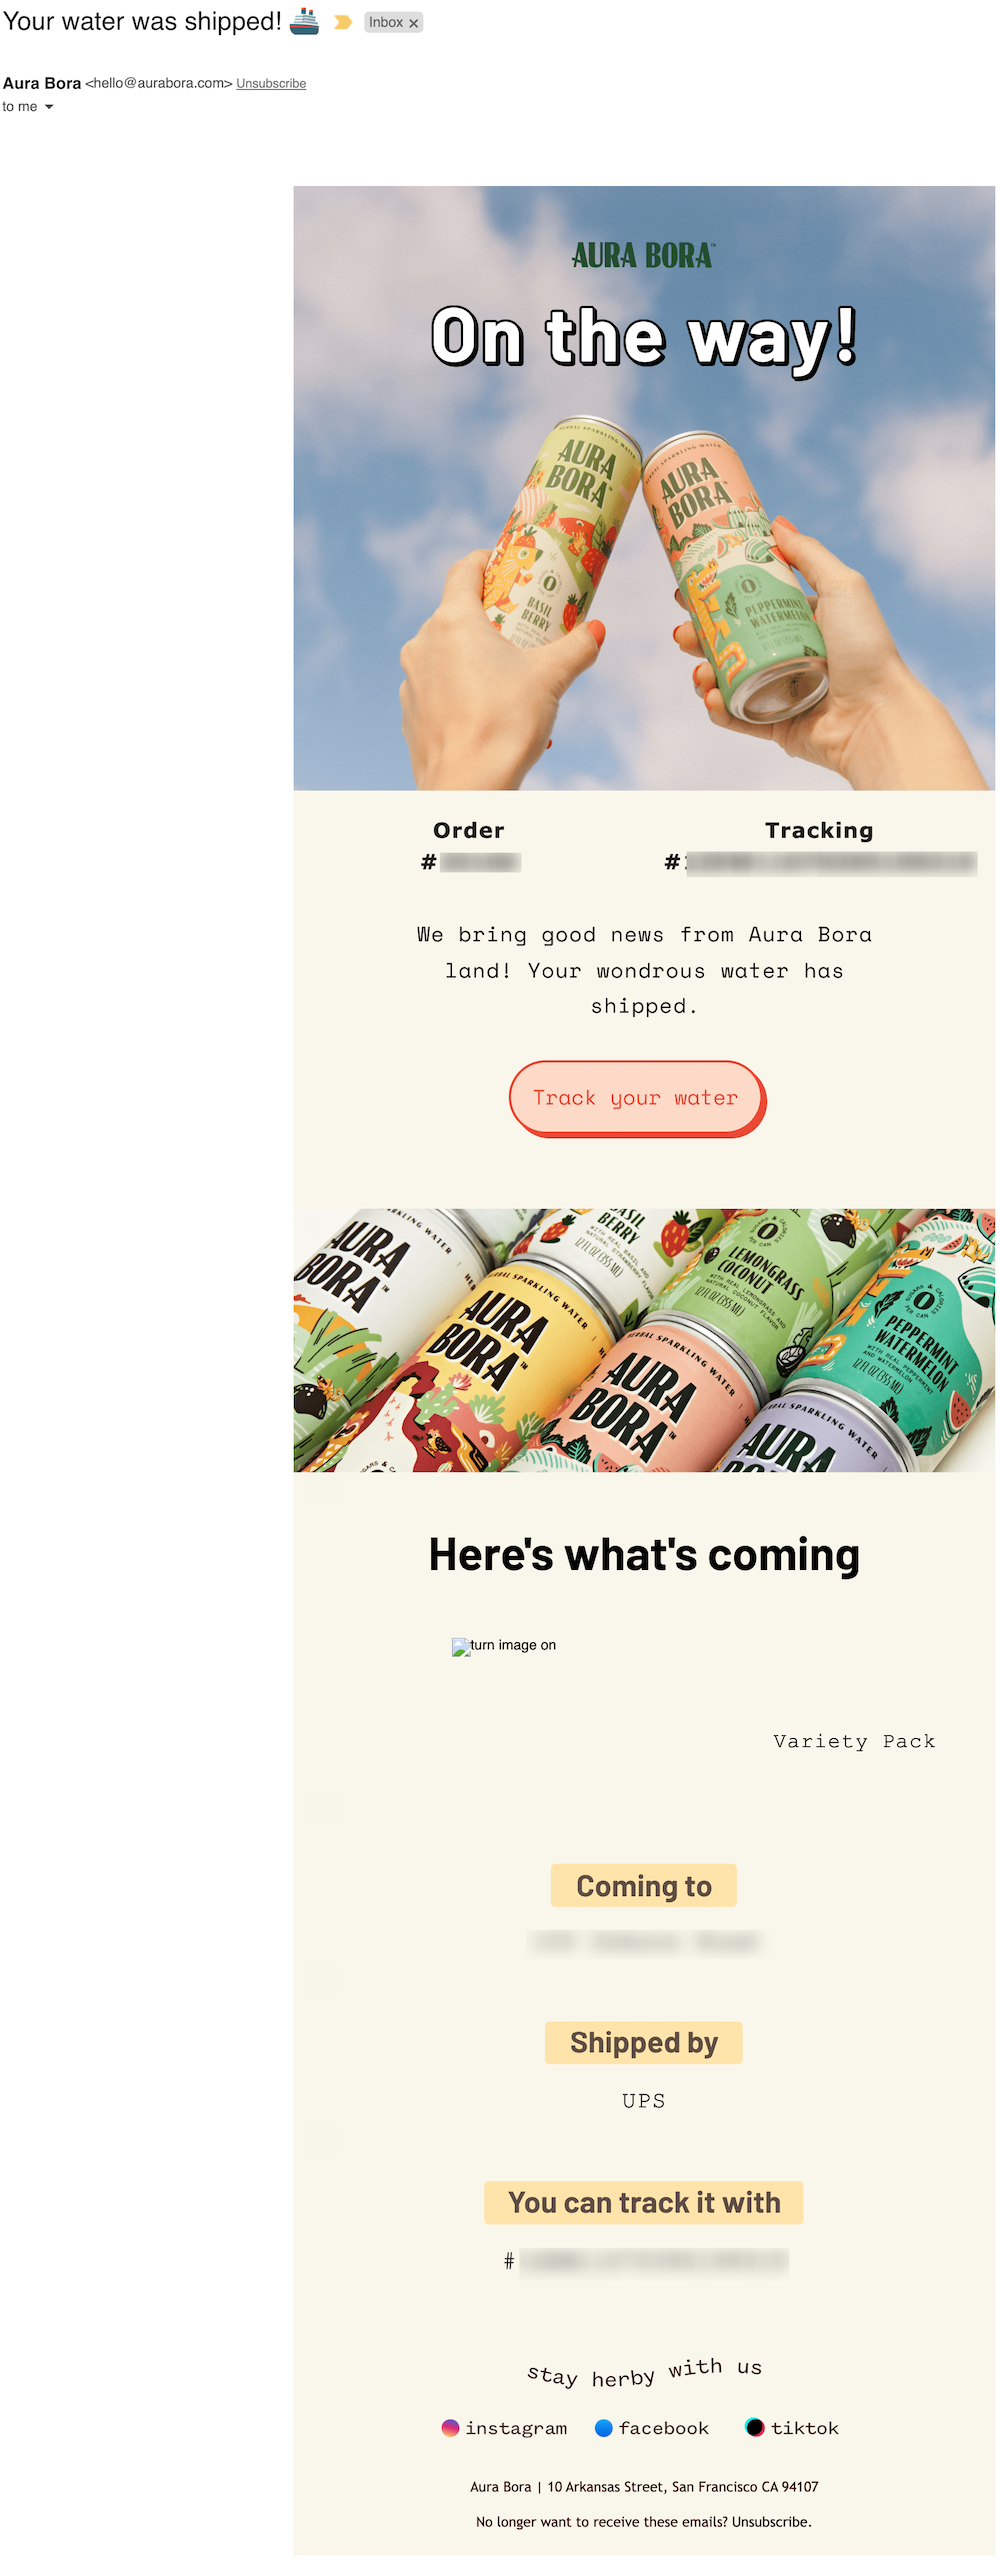 Aura Bora has eye-catching branding with specific colors, designs, typography, and copy. All these elements are woven into its shipping confirmation email, making it memorable.